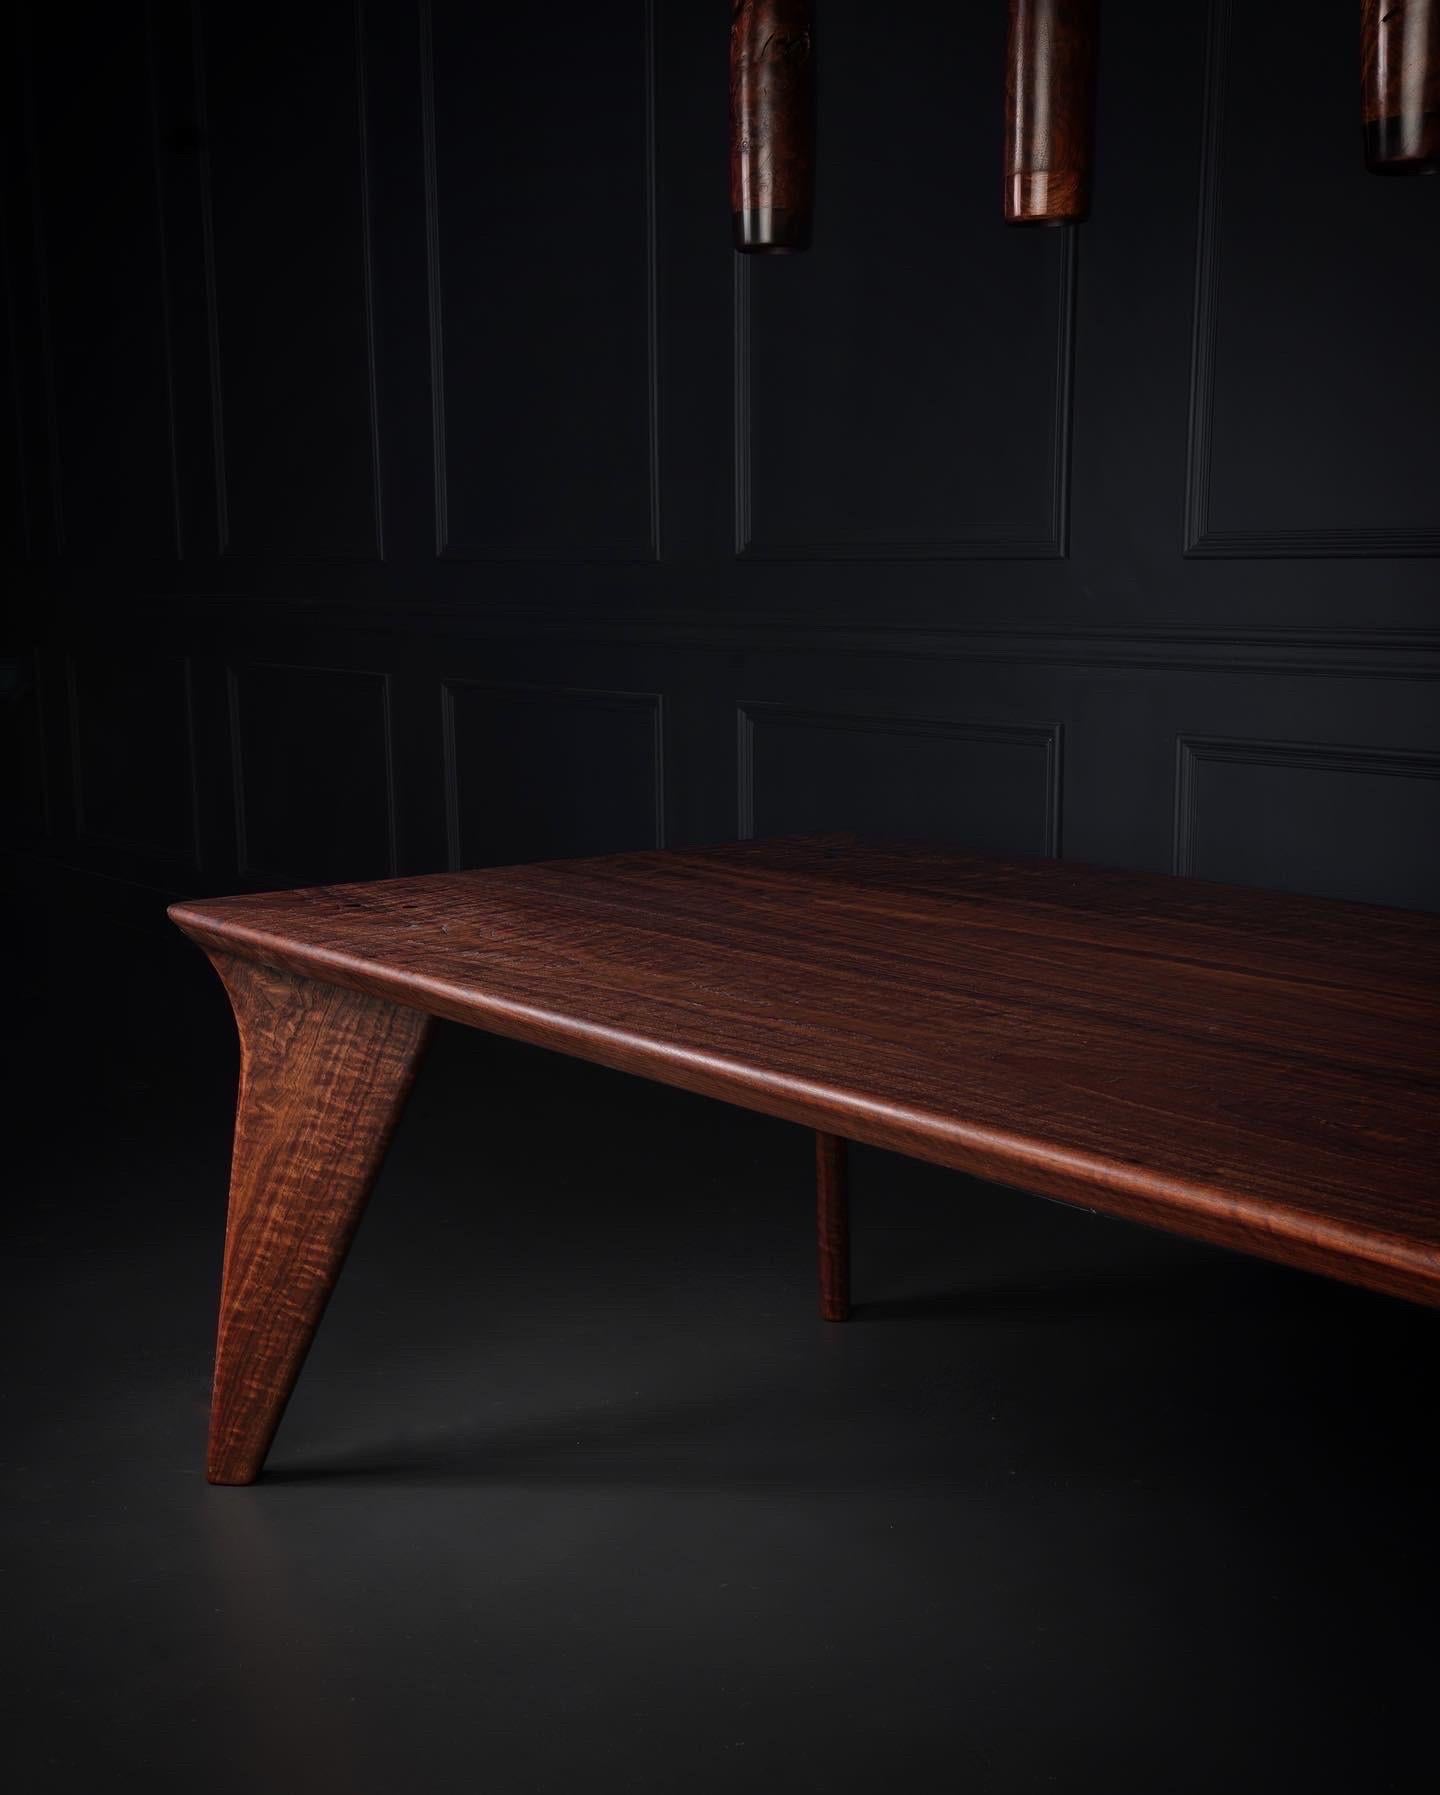 The Vöeg table in solid wood features just that....solid wood, no screws, metal or other. This particular table was handcrafted from matching boards in some of the curliest American Black Walnut we have ever had the pleasure of working with. 

The